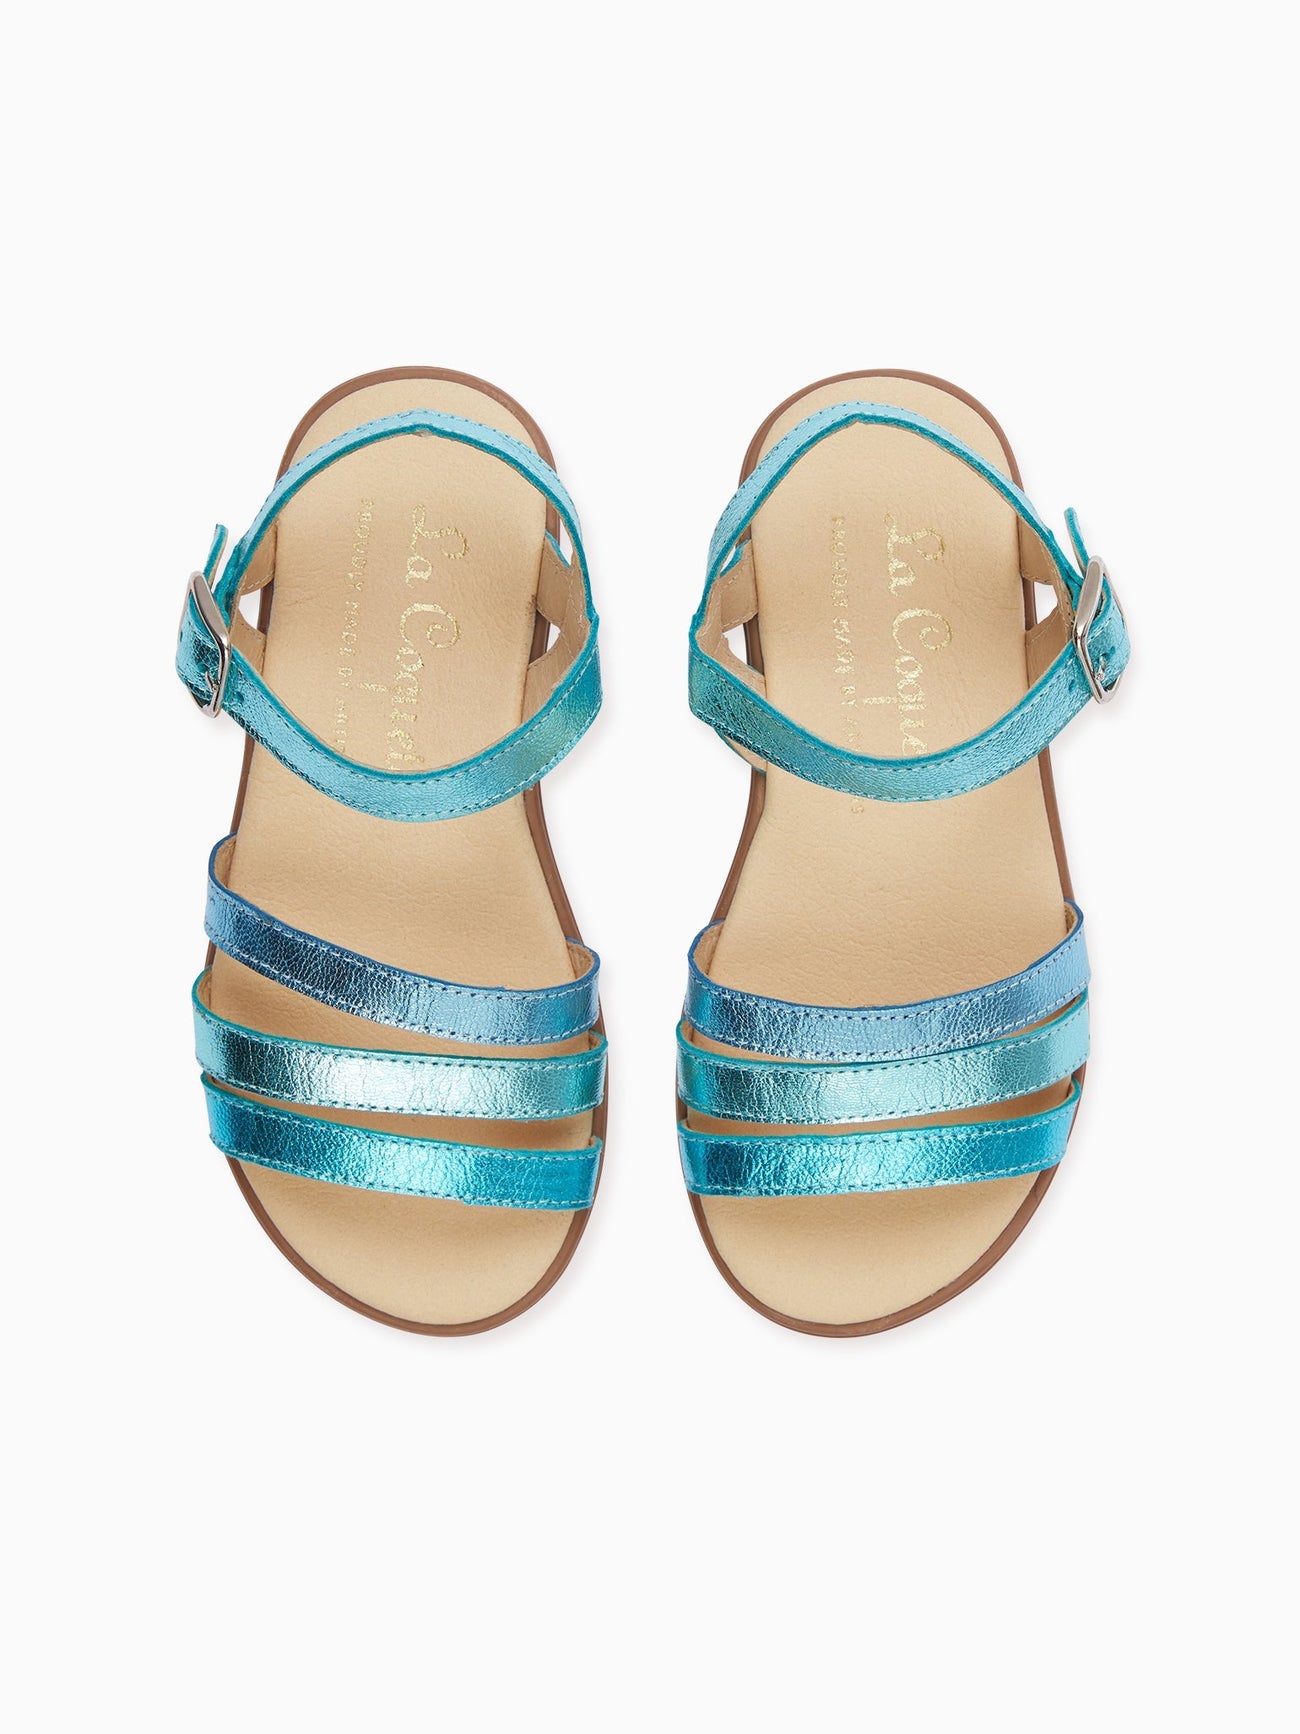 Buy online Girls Gold Leather Sandal from sandals & floaters for